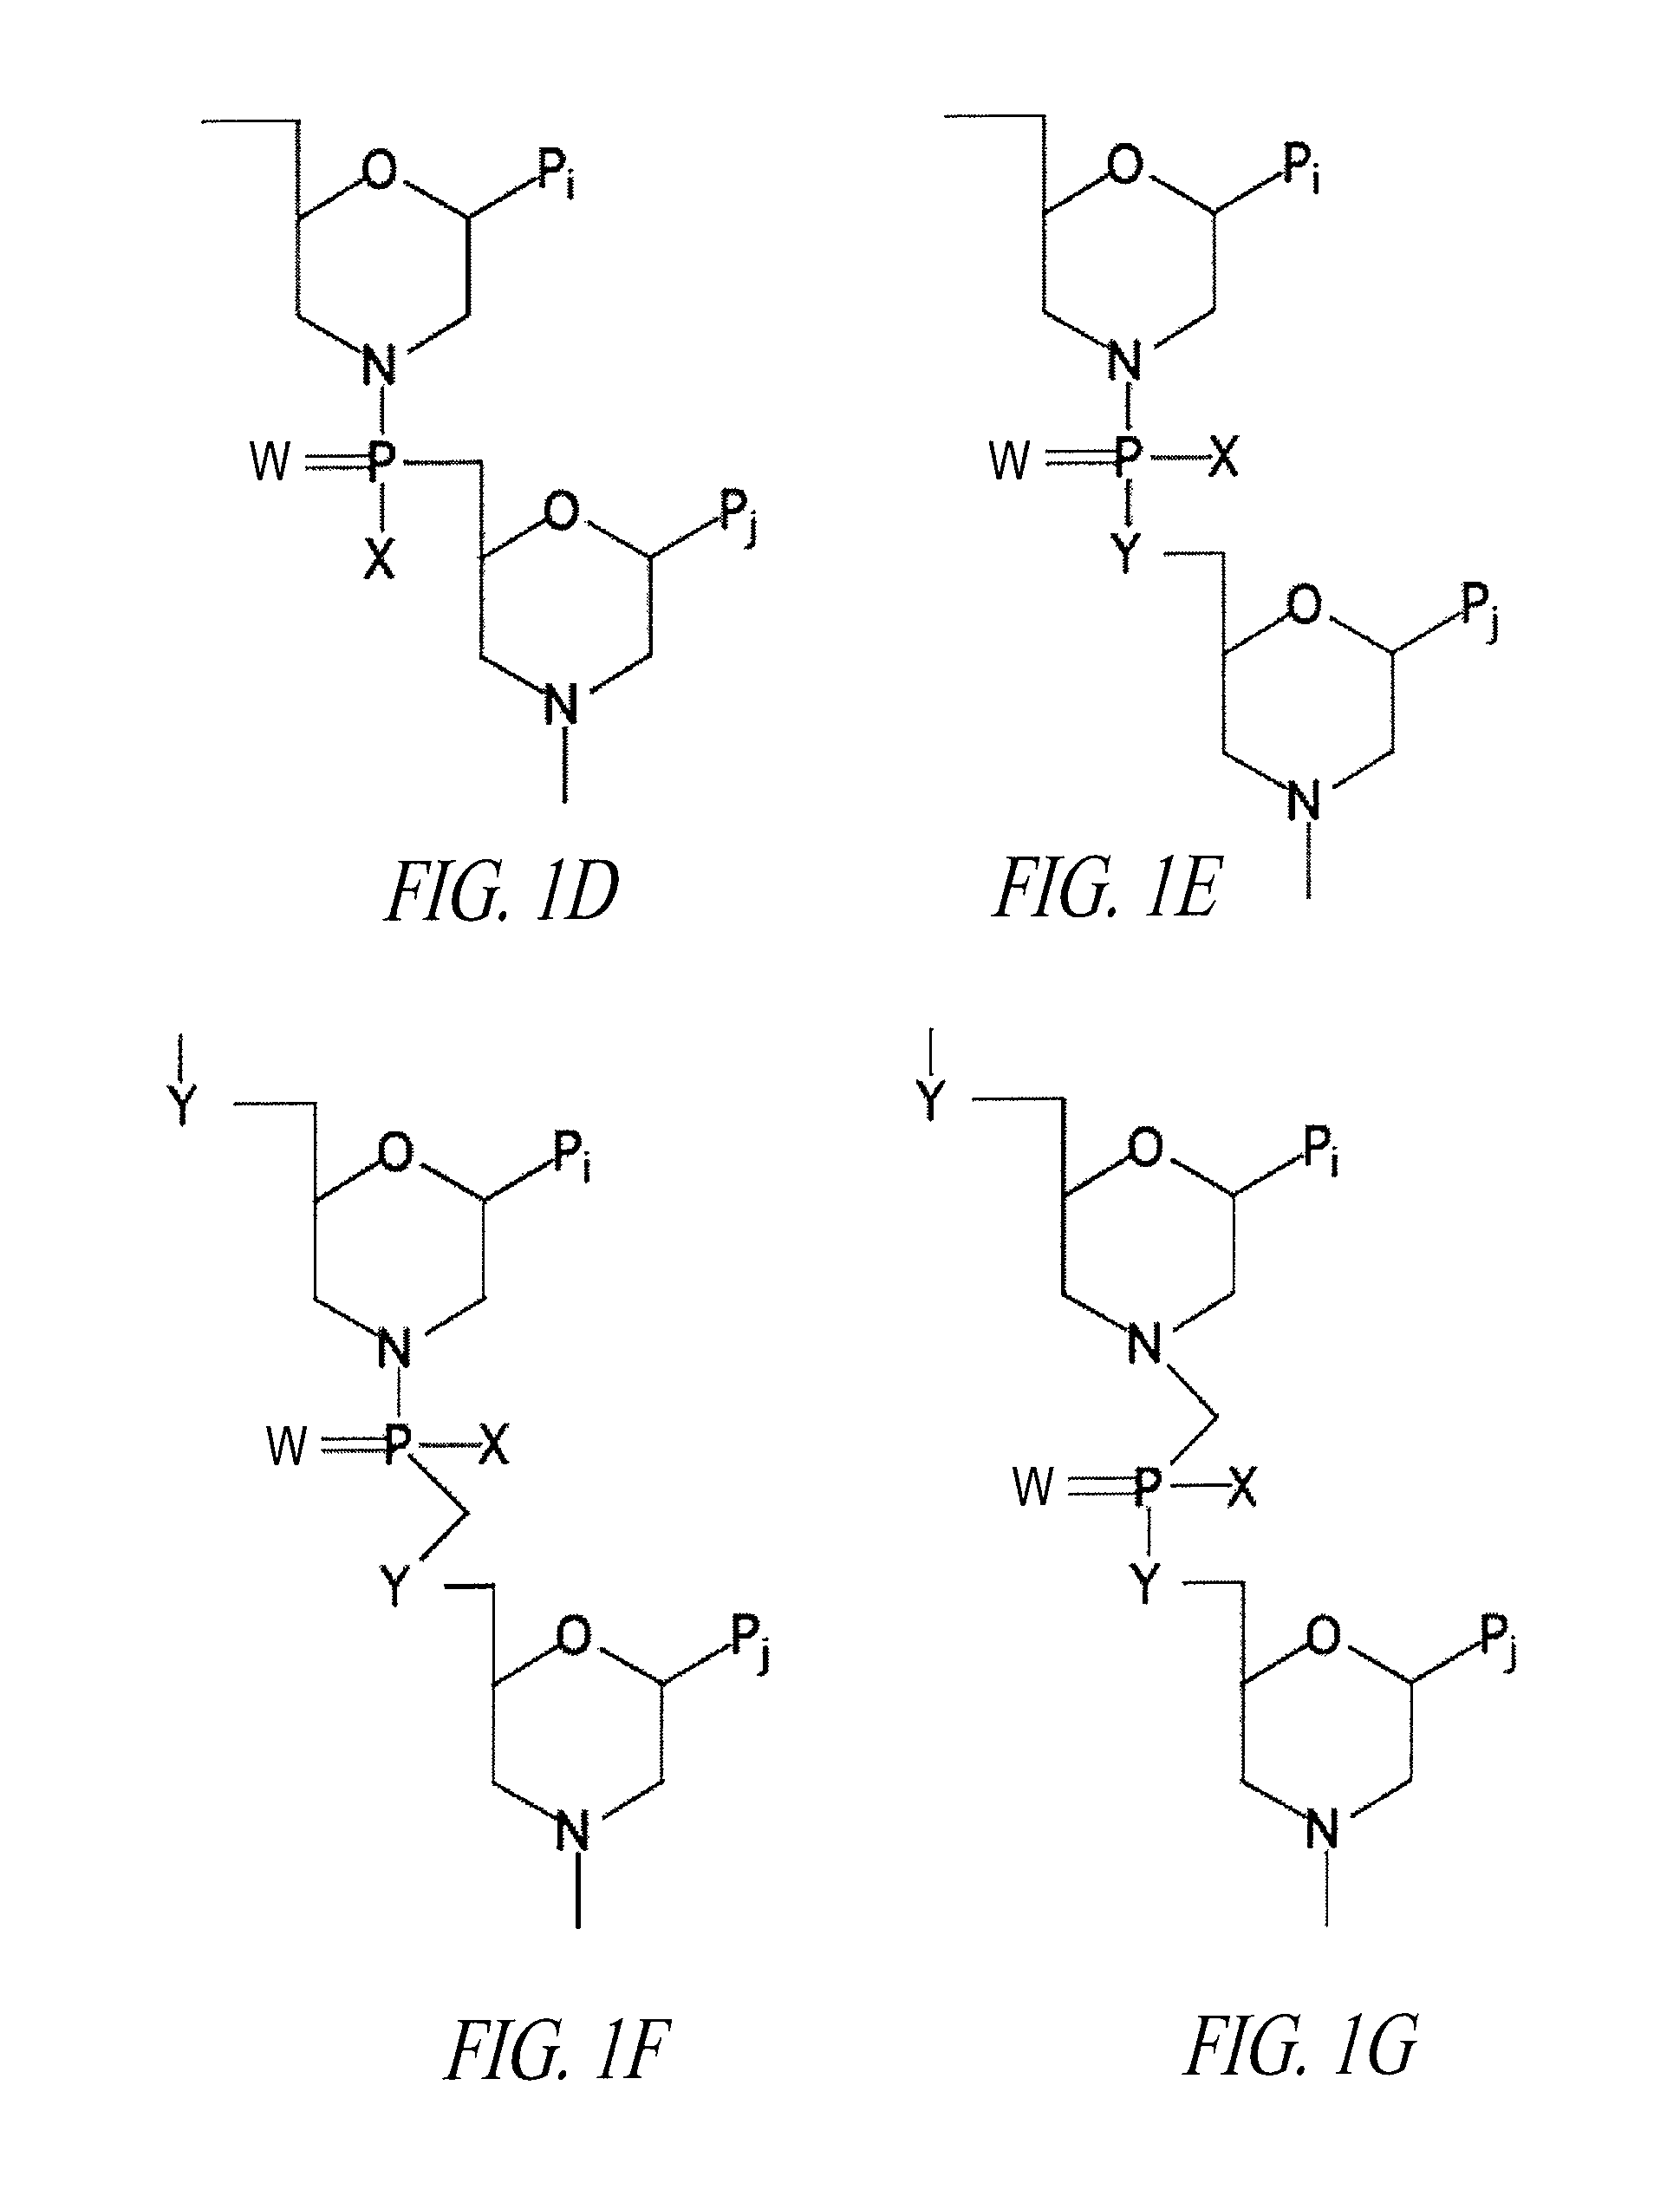 Oligonucleotide analogues having modified intersubunit linkages and/or terminal groups